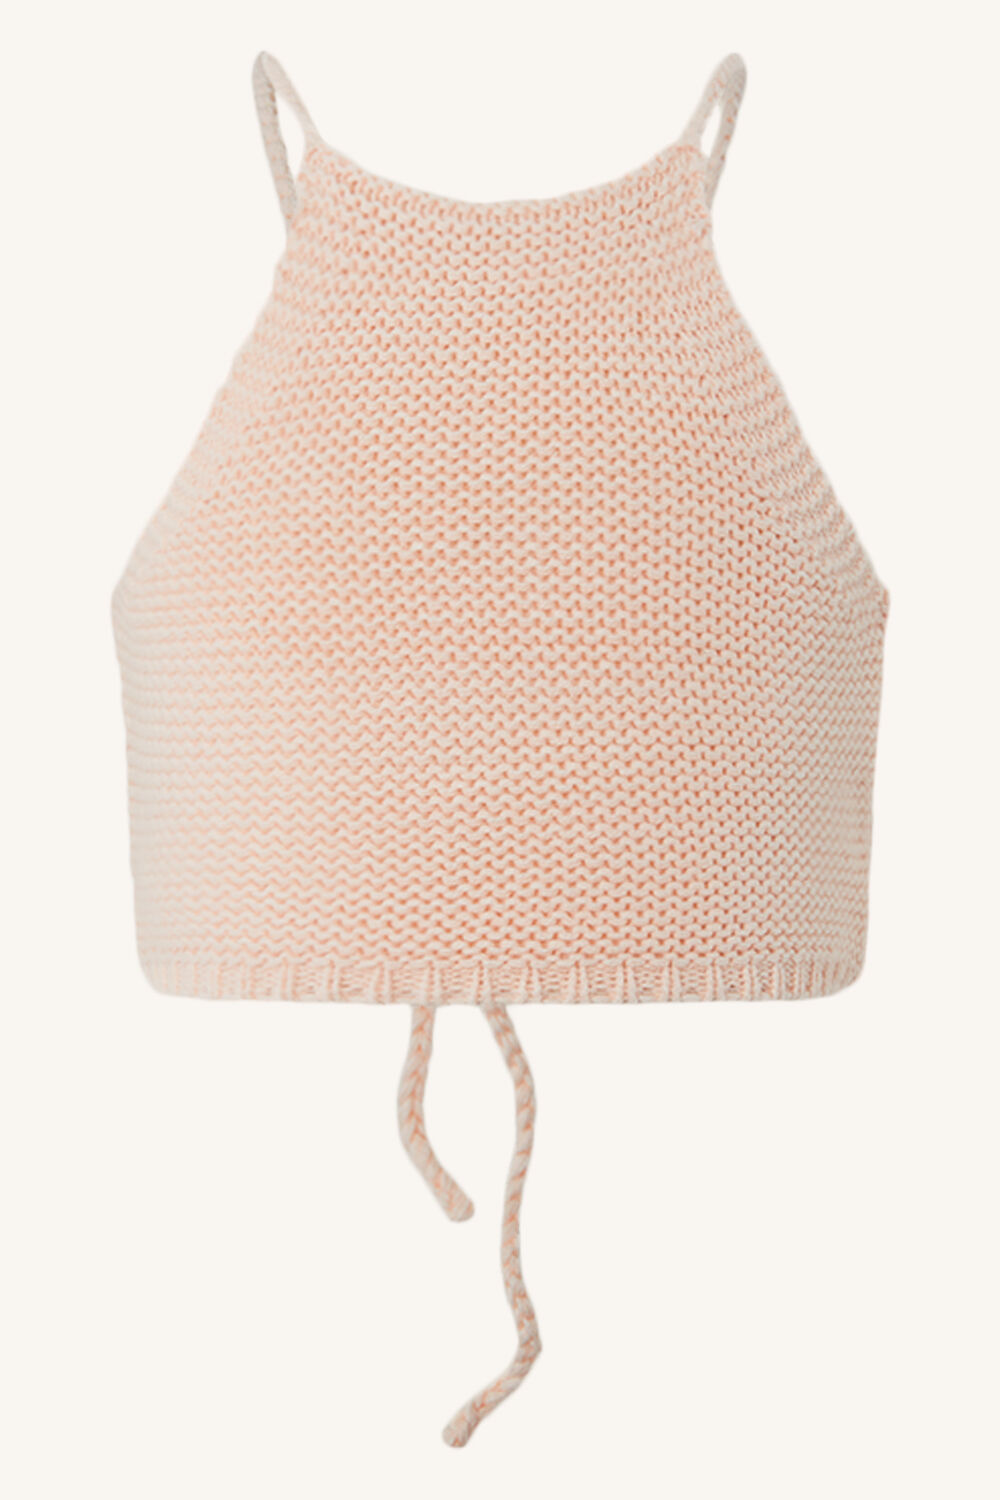 GIRLS ANDI KNIT TOP in colour SEASHELL PINK